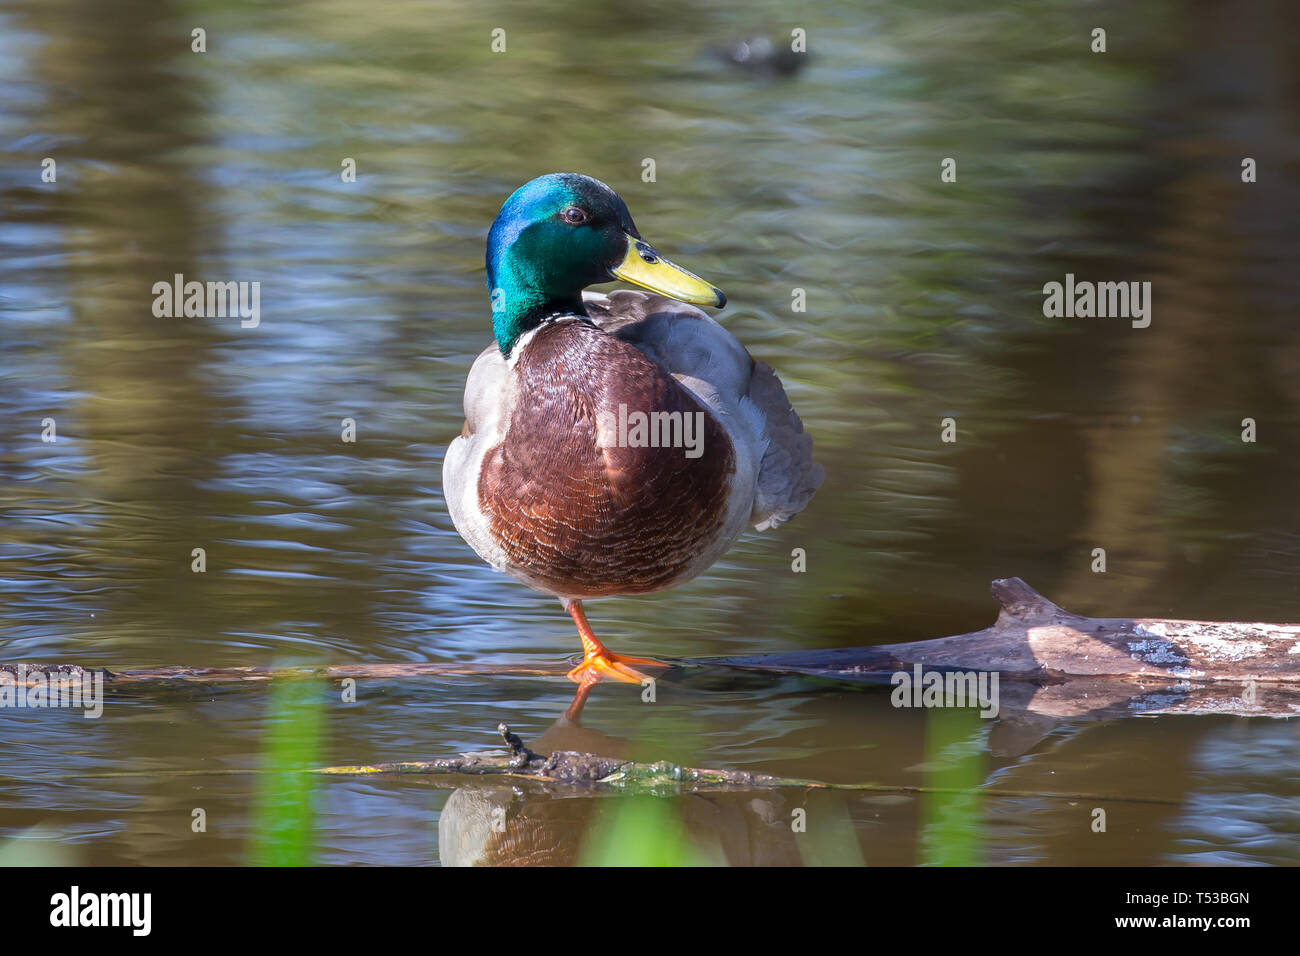 Front close up of isolated, male UK mallard duck (Anas platyrhynchos) standing on one leg, balancing on log in water, in spring sunshine. Stock Photo